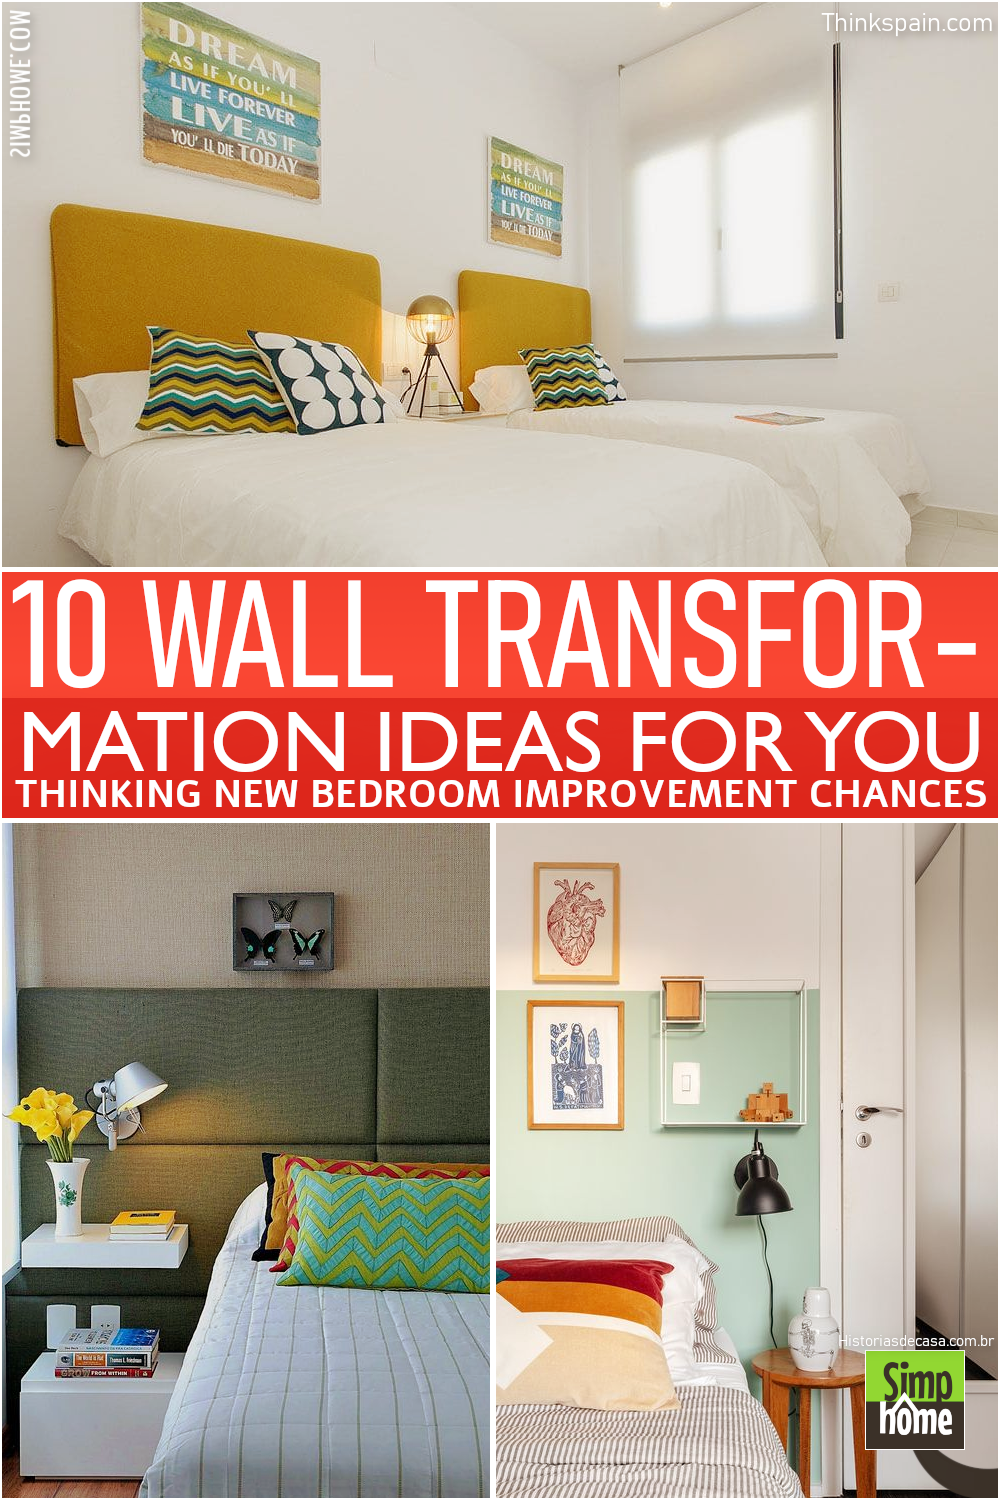 This is 10 Bedroom Wall Transformations Poster from Simphome